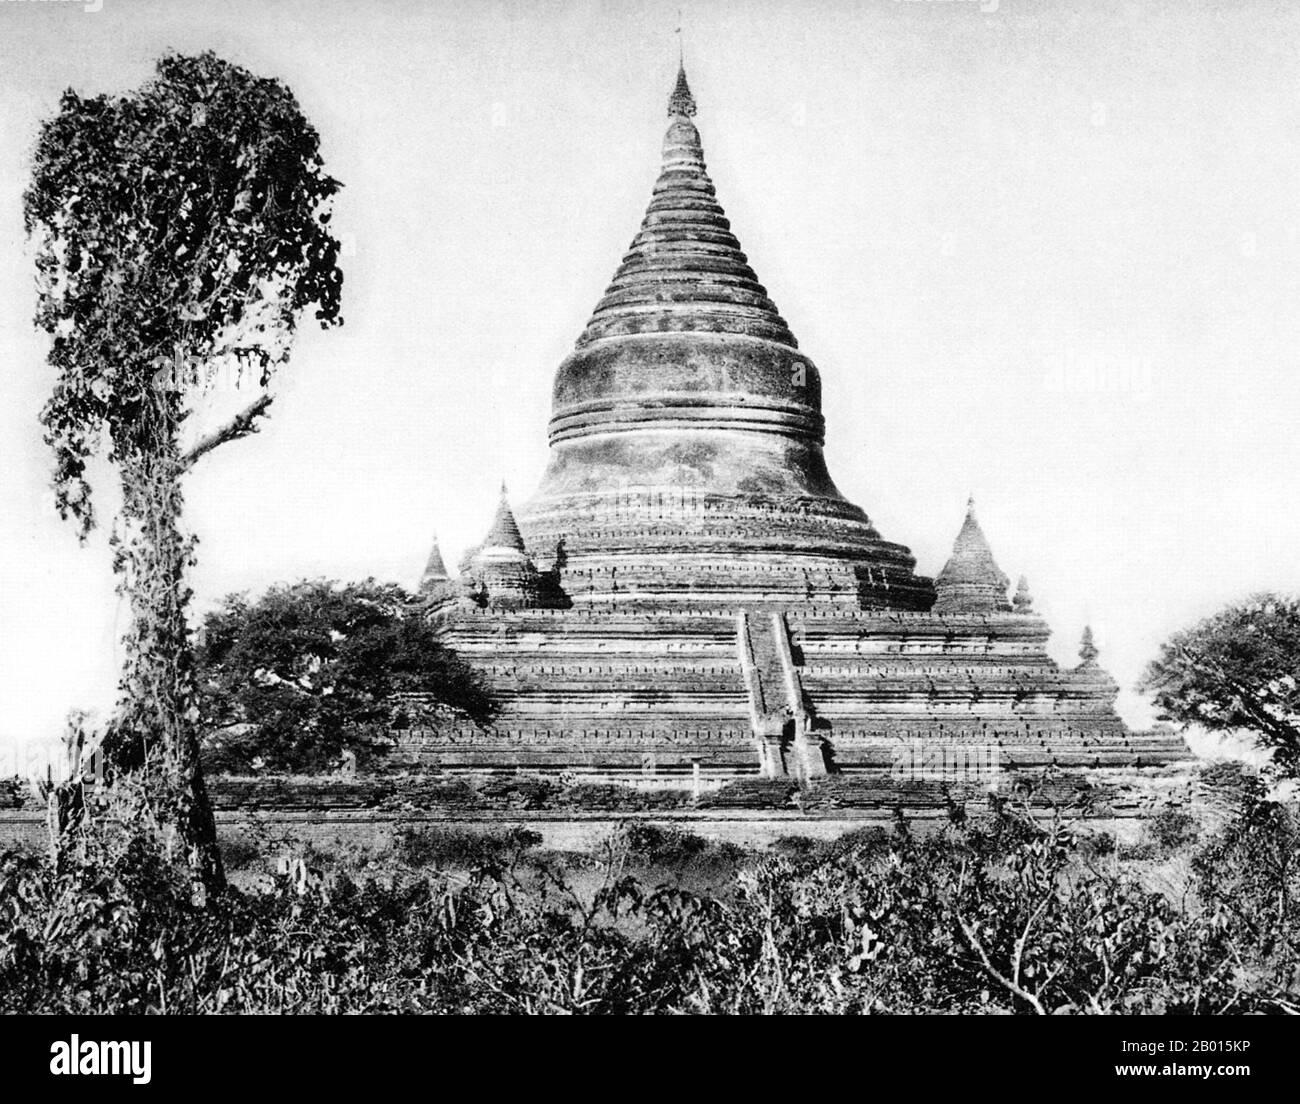 Burma/Myanmar: Mingalazedi Pagoda in Bagan, Upper Burma, c. 1920s.  Mingalazedi Pagoda was built in 1284 during the reign of King Narathihapate. It is one of the few temples in Bagan with a full set of glazed terracotta tiles depicting the ‘Jataka’—an ancient Pali book of verses related to the previous births of the Buddha.  The pagoda was built in brick and contains several terraces leading to a large pot-shaped stupa at its centre, topped by a bejeweled umbrella (hti). Mingalazedi Pagoda was built a few years before the First Burmese Empire (Pagan Kingdom) was pillaged by the Mongols in 1287 Stock Photo